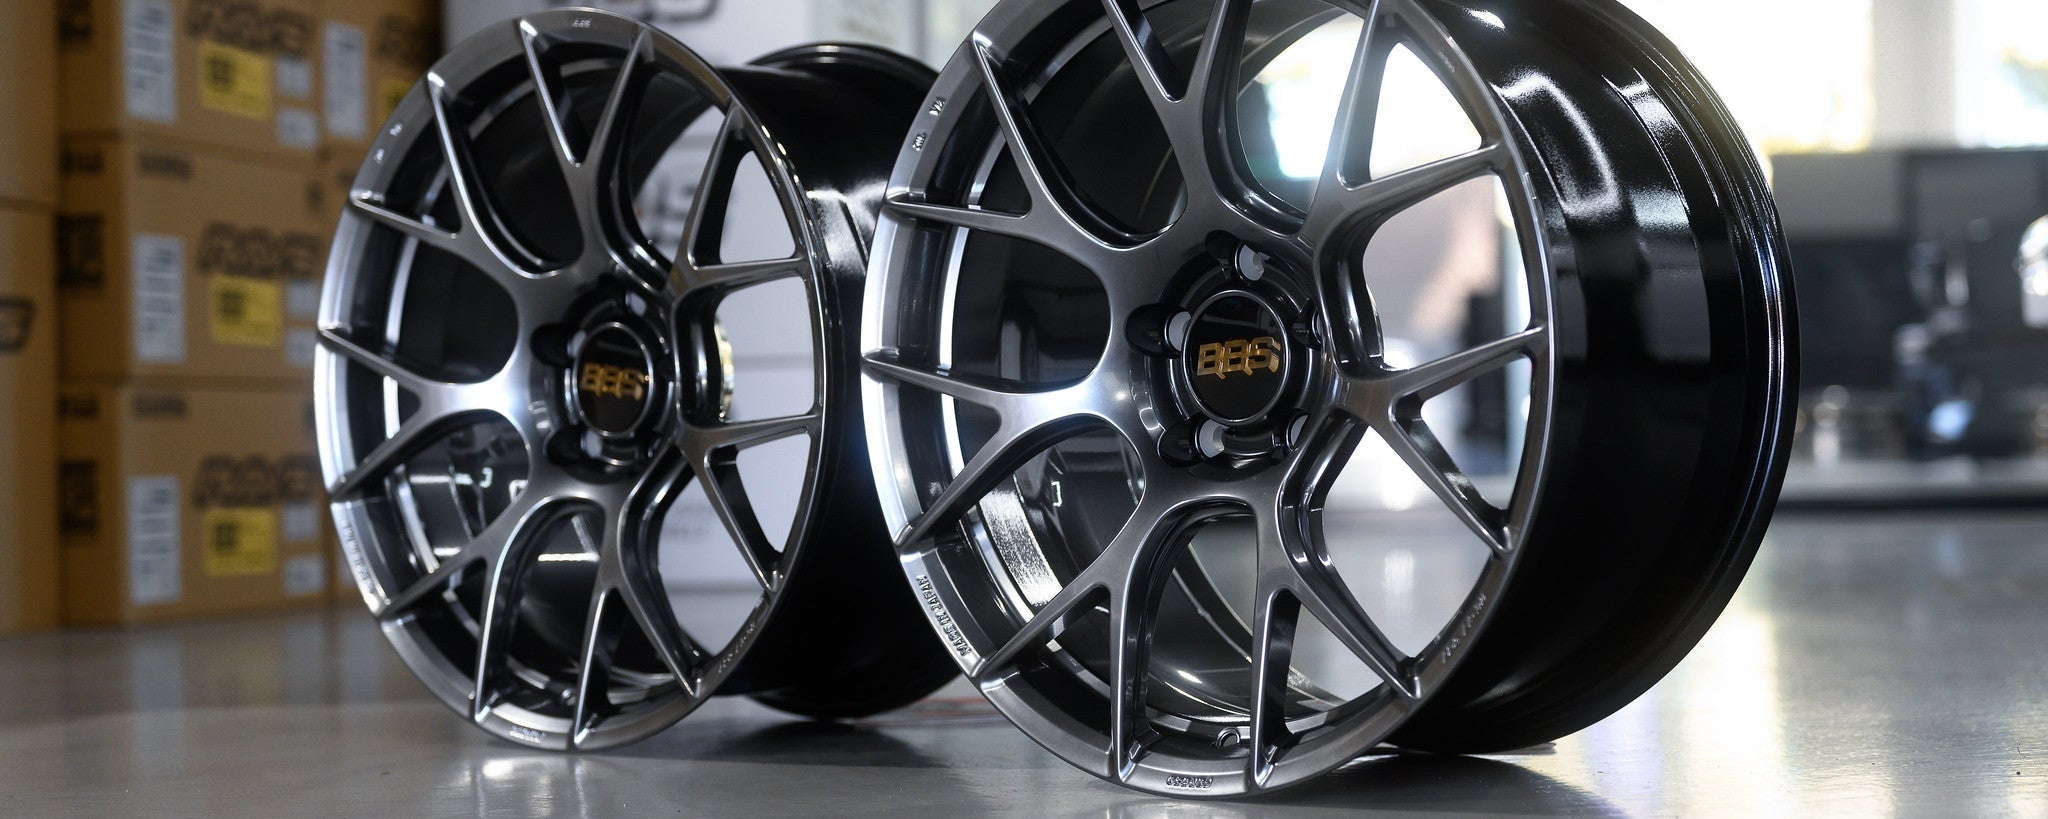 BBS RE-V7 for GR86 - Premium Wheels from BBS Japan - From just $4890.0! Shop now at MK MOTORSPORTS